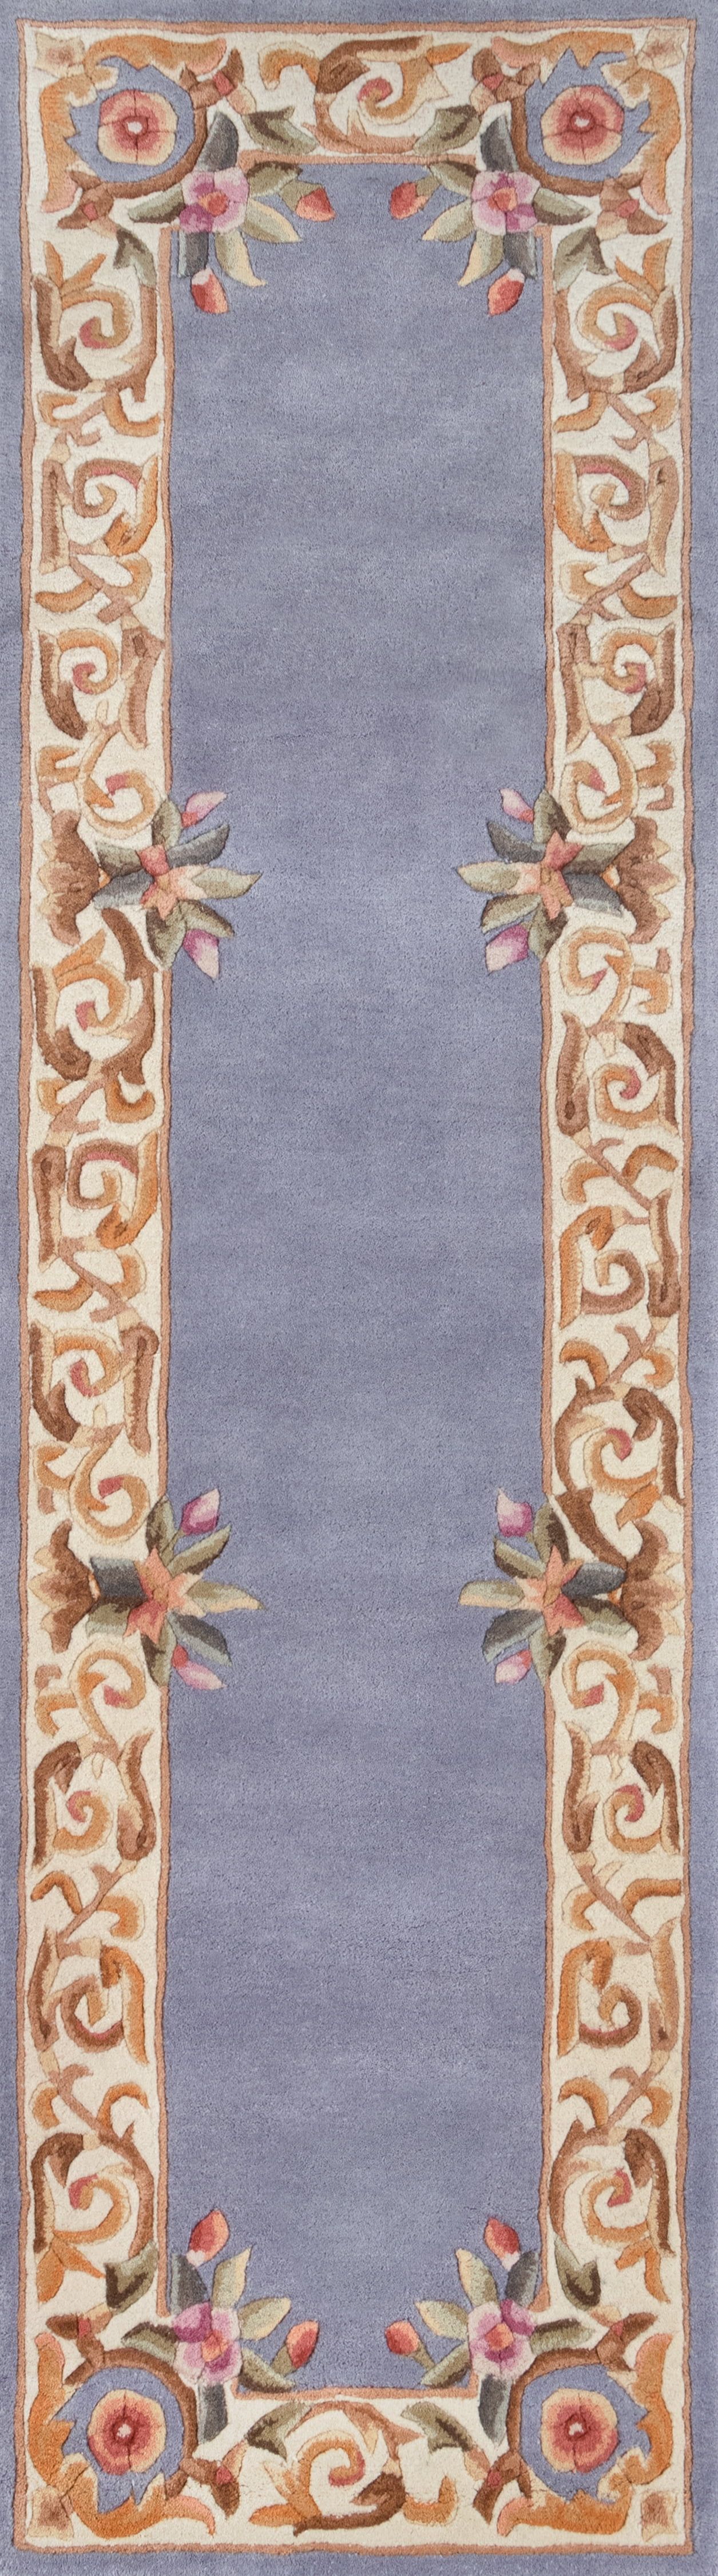 Royal Baroque Blue Floral Hand-Tufted Wool Runner Rug 2'3" X 8'